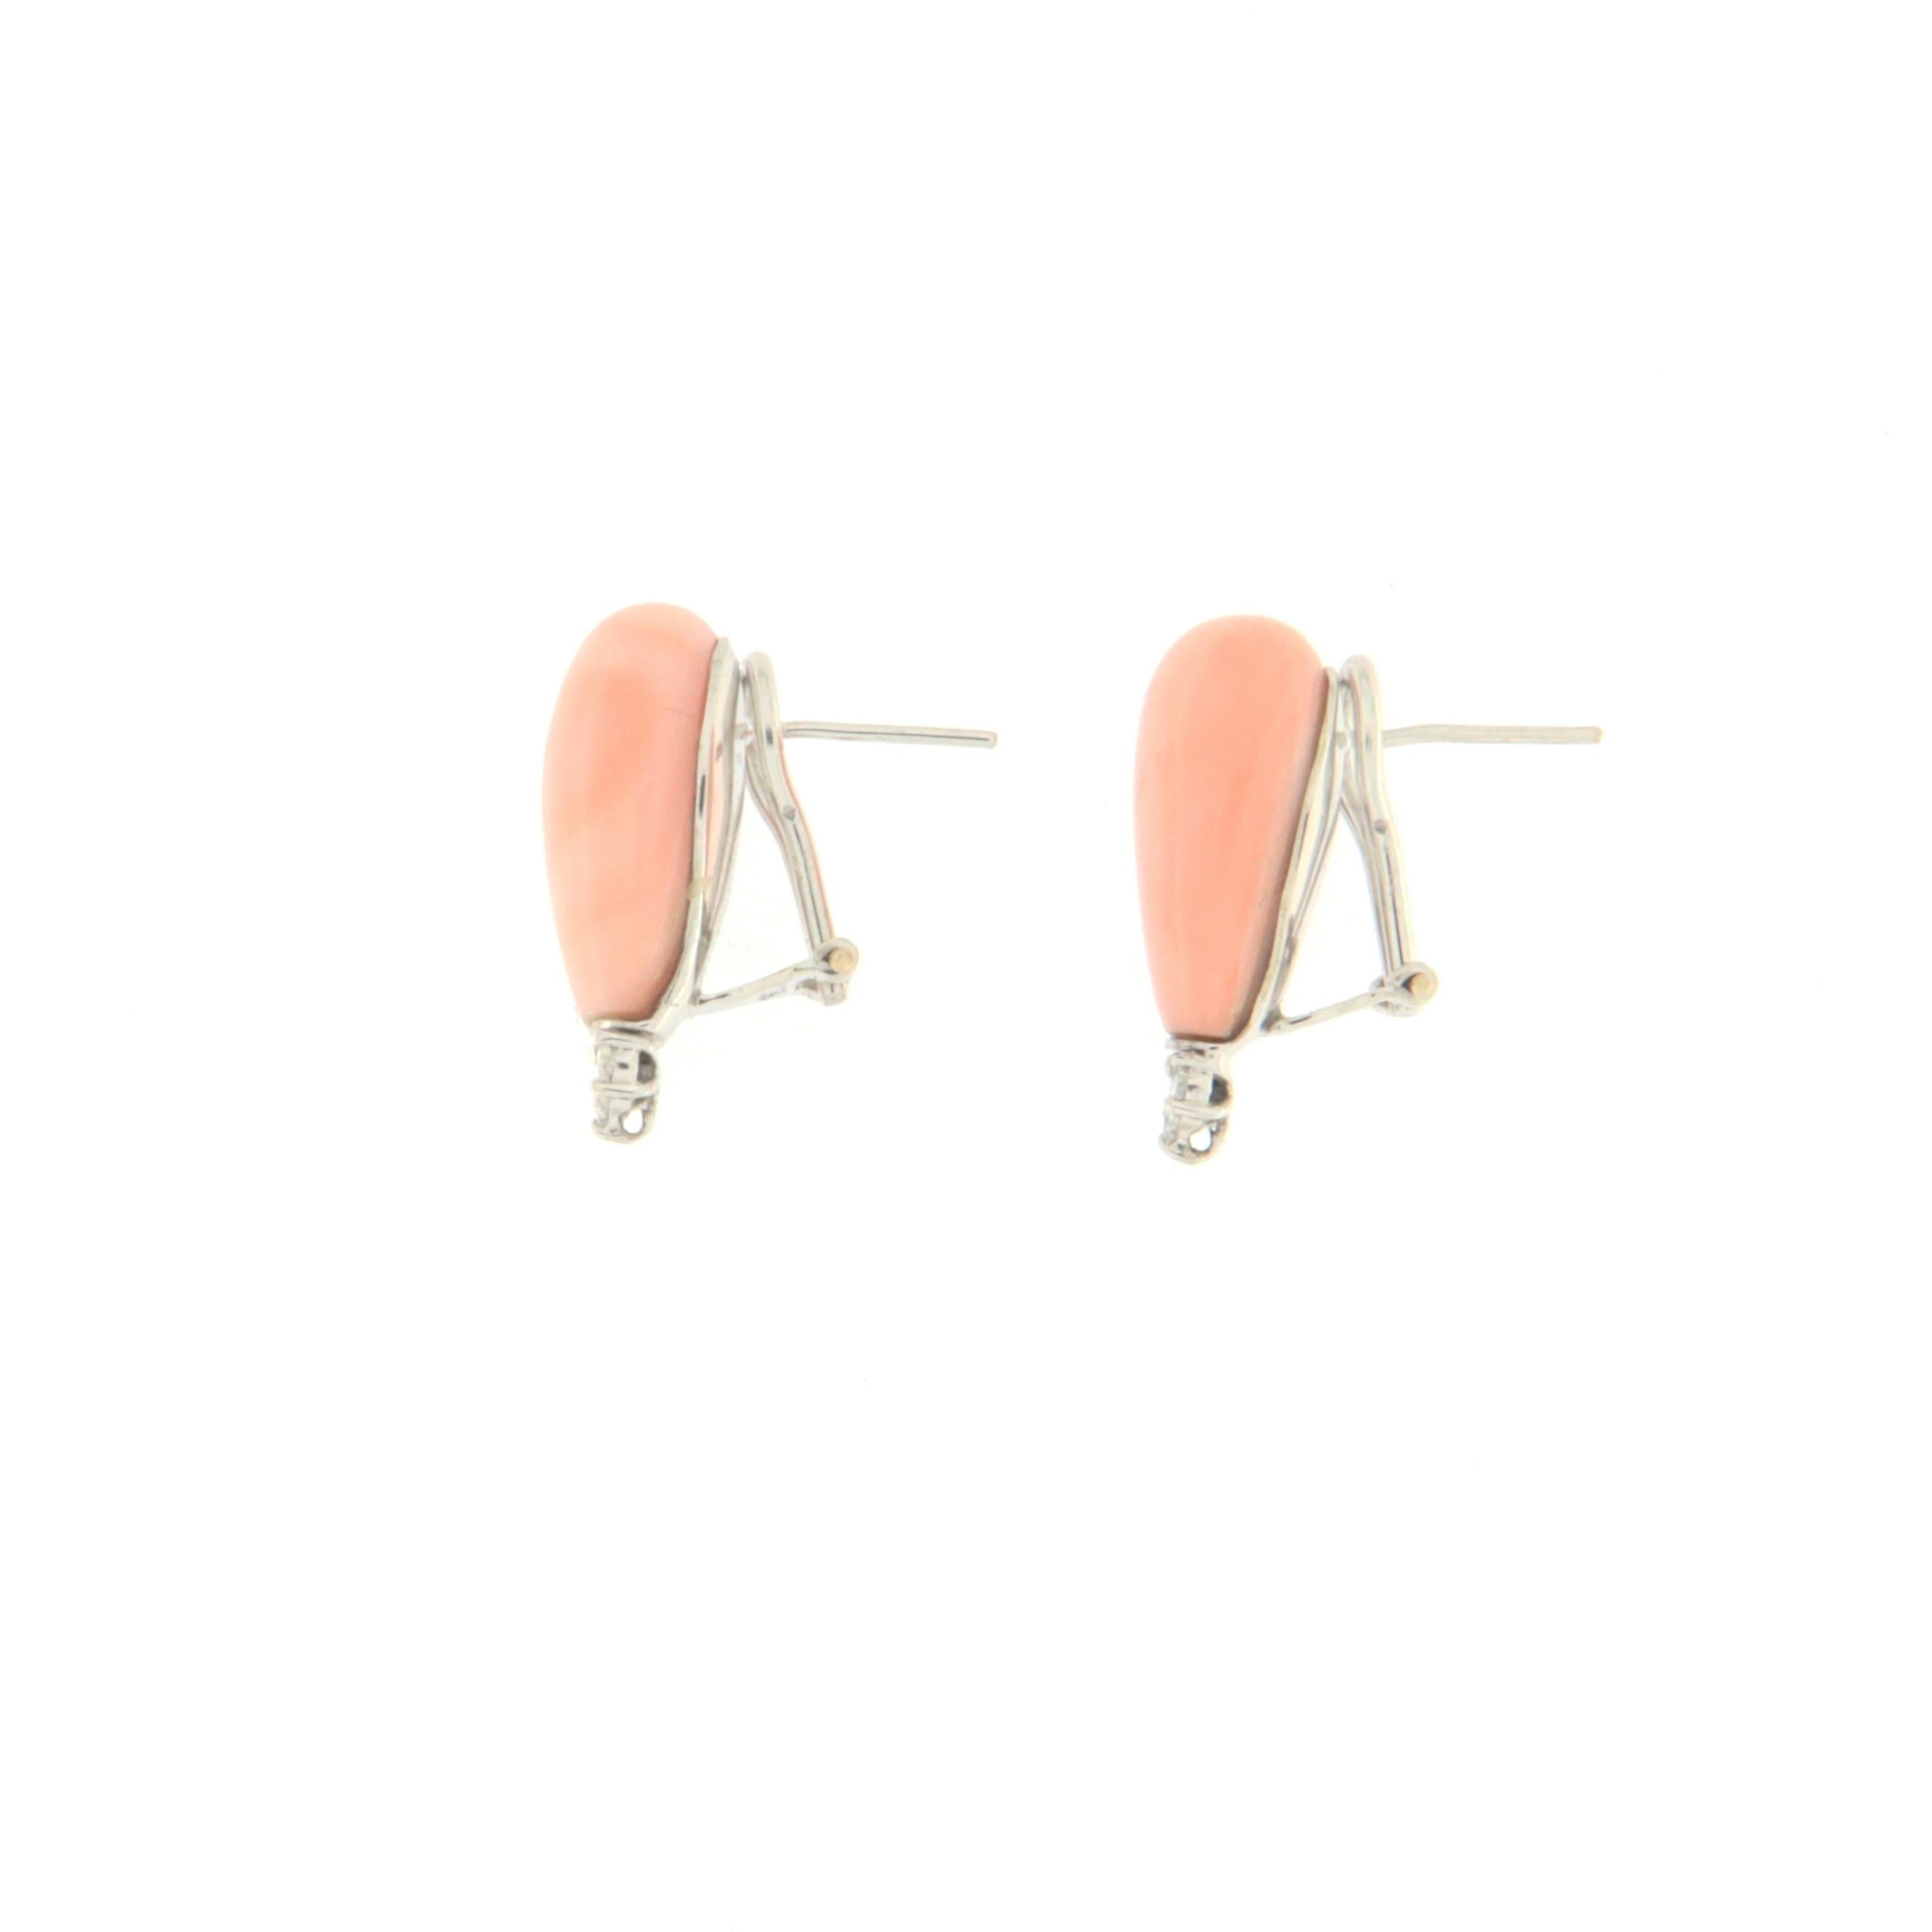 For any problems related to some materials contained in the items that do not allow shipping and require specific documents that require a particular period, please contact the seller with a private message to solve the problem.

Beautiful earrings